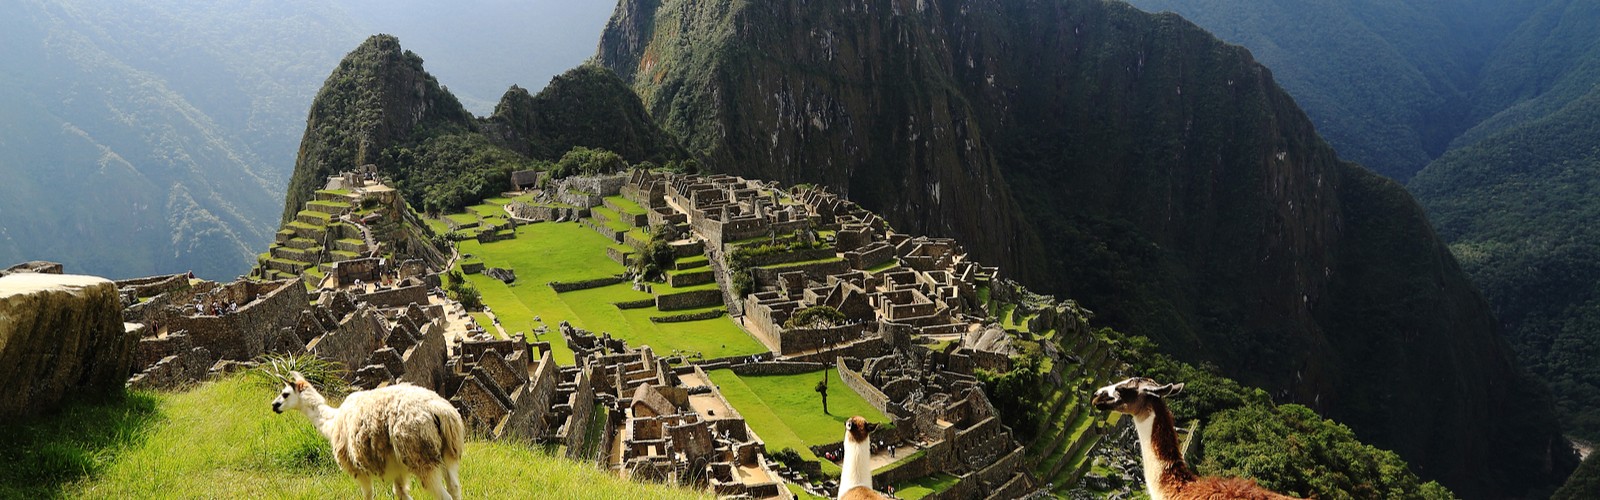 8 days tour of peru - luxury per holiday packages